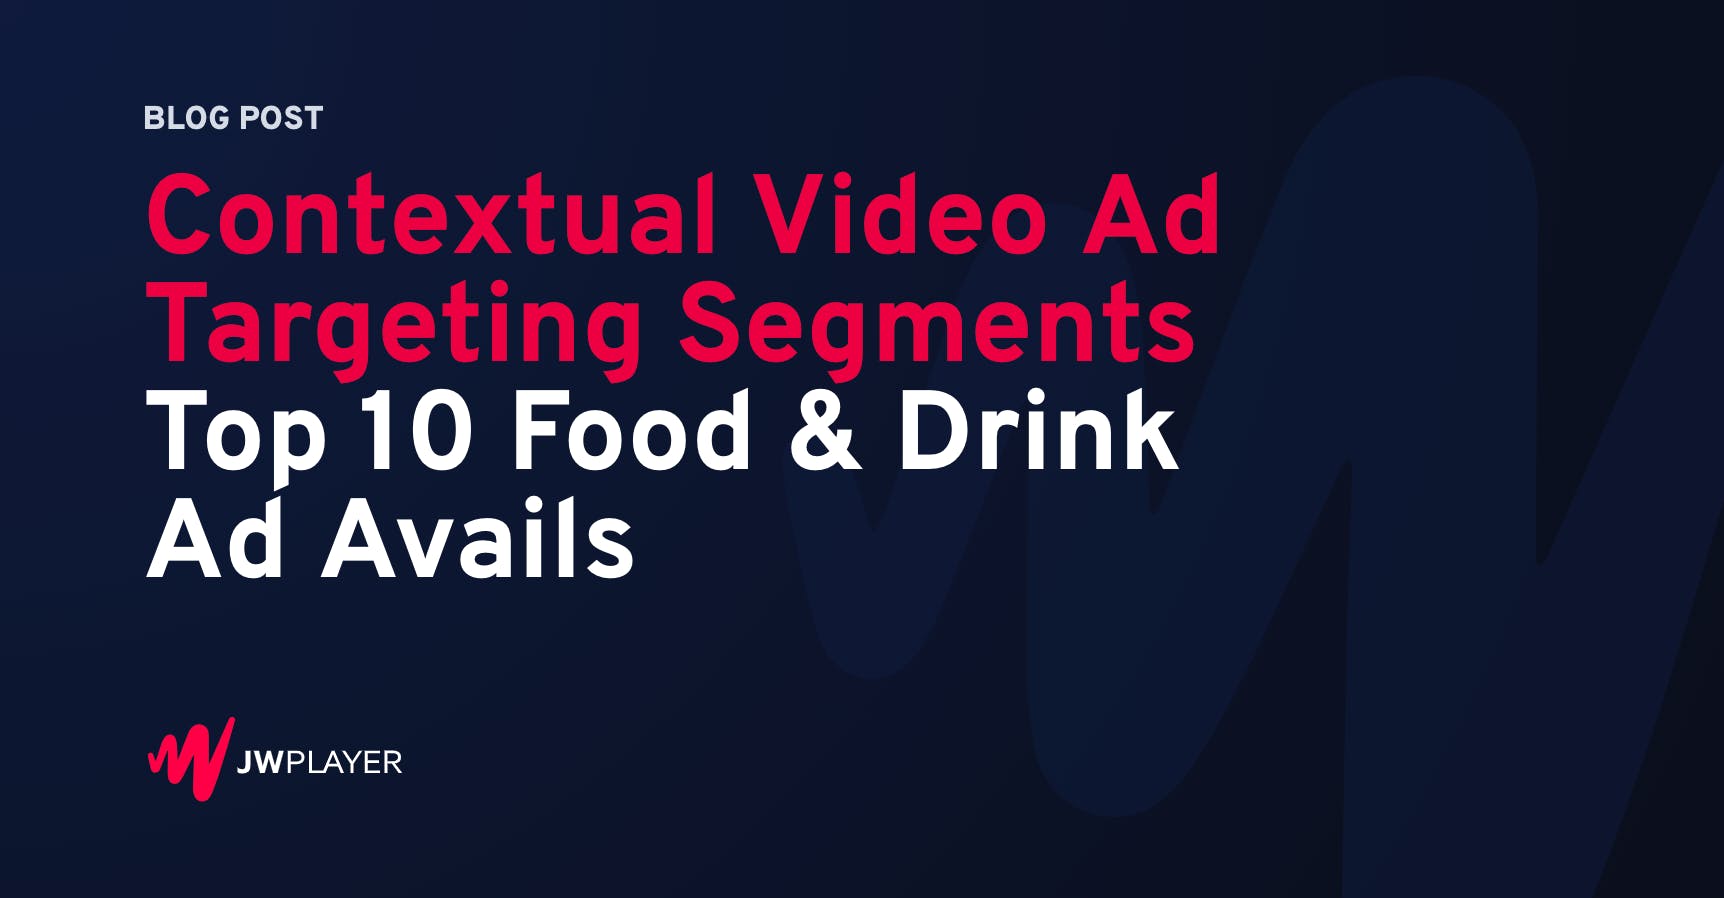 Contextual Video Ad Targeting - Top 10 Food & Drink Ad Avails